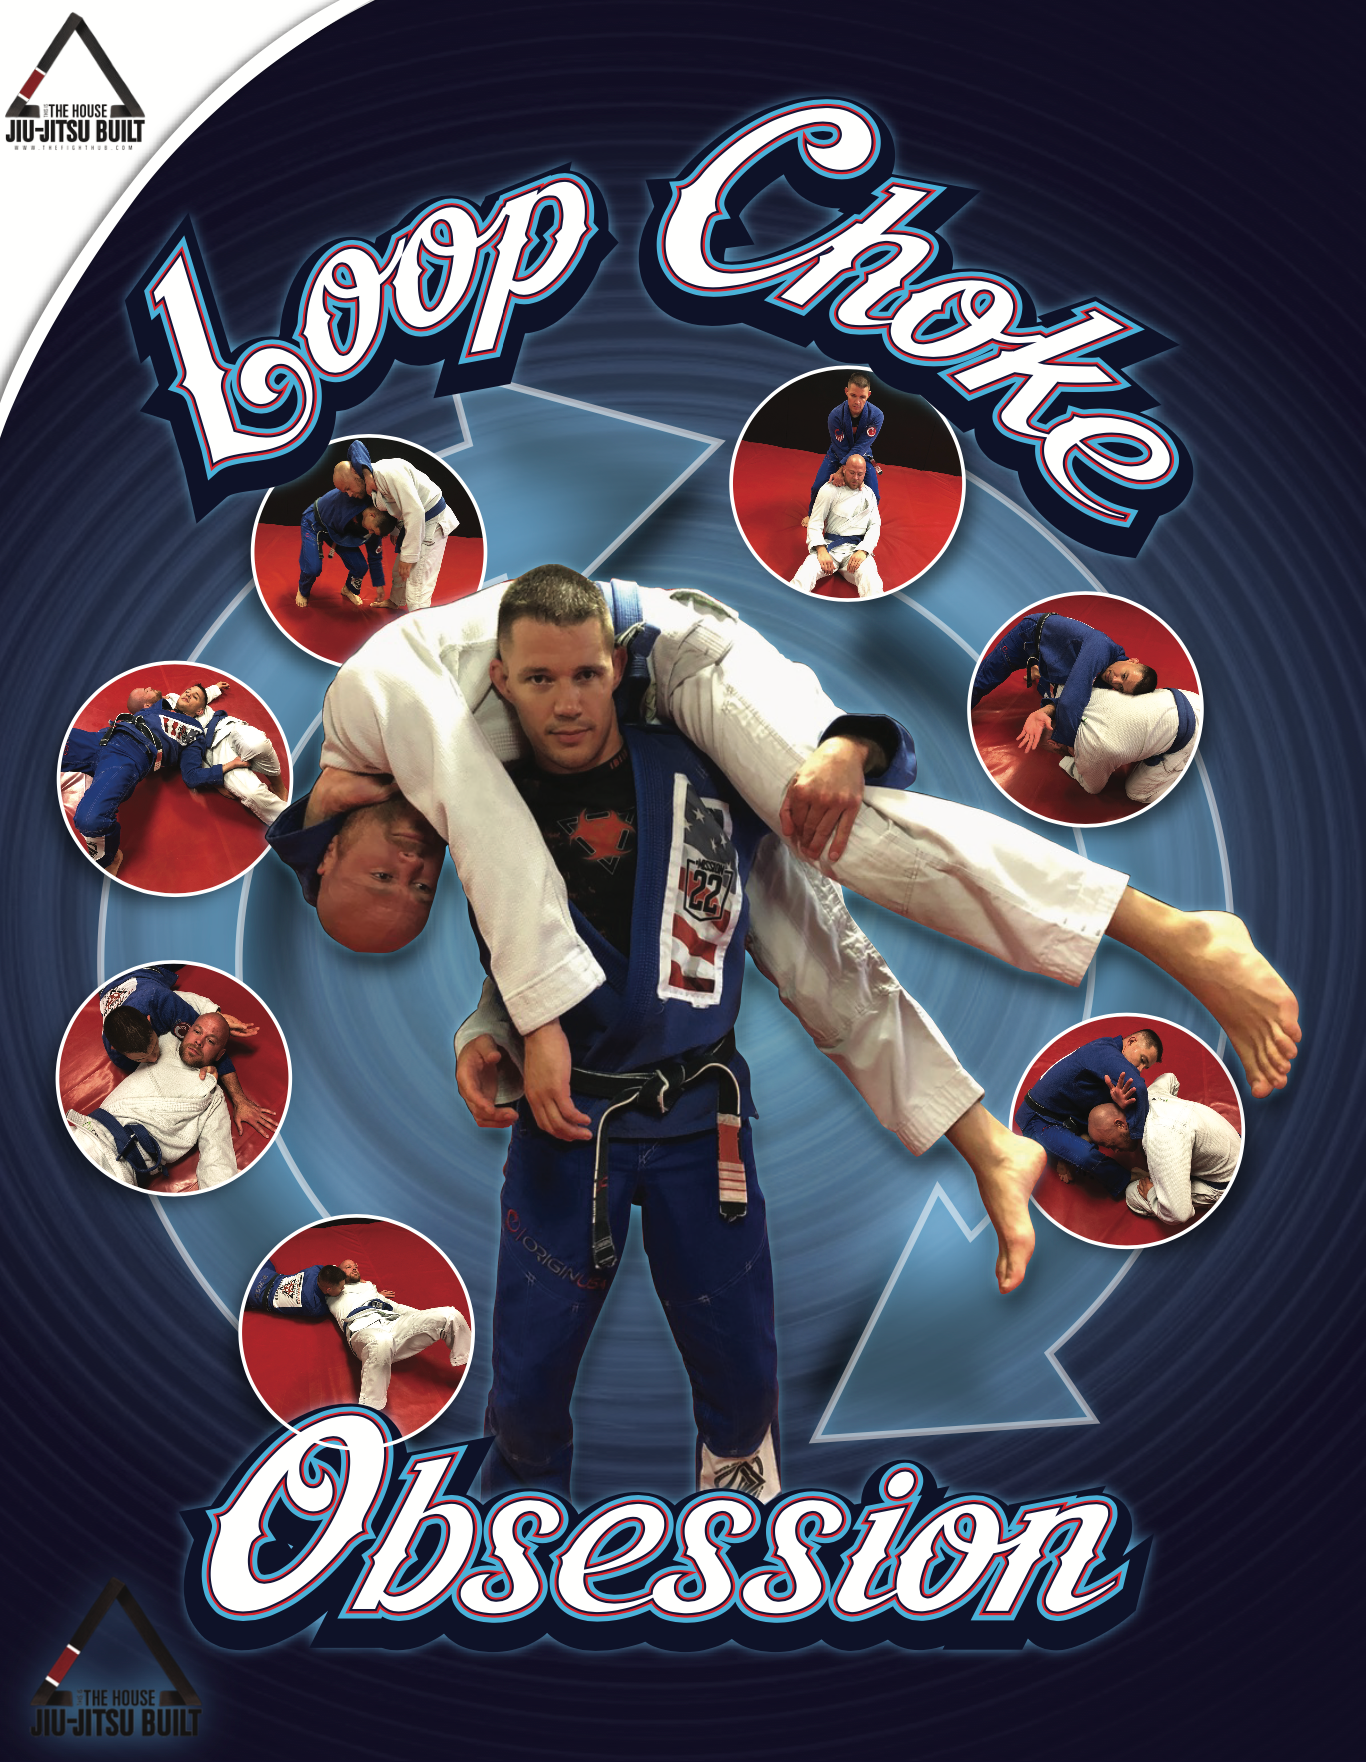 The Loop Choke Obsession DVD by James Clingerman - Budovideos Inc